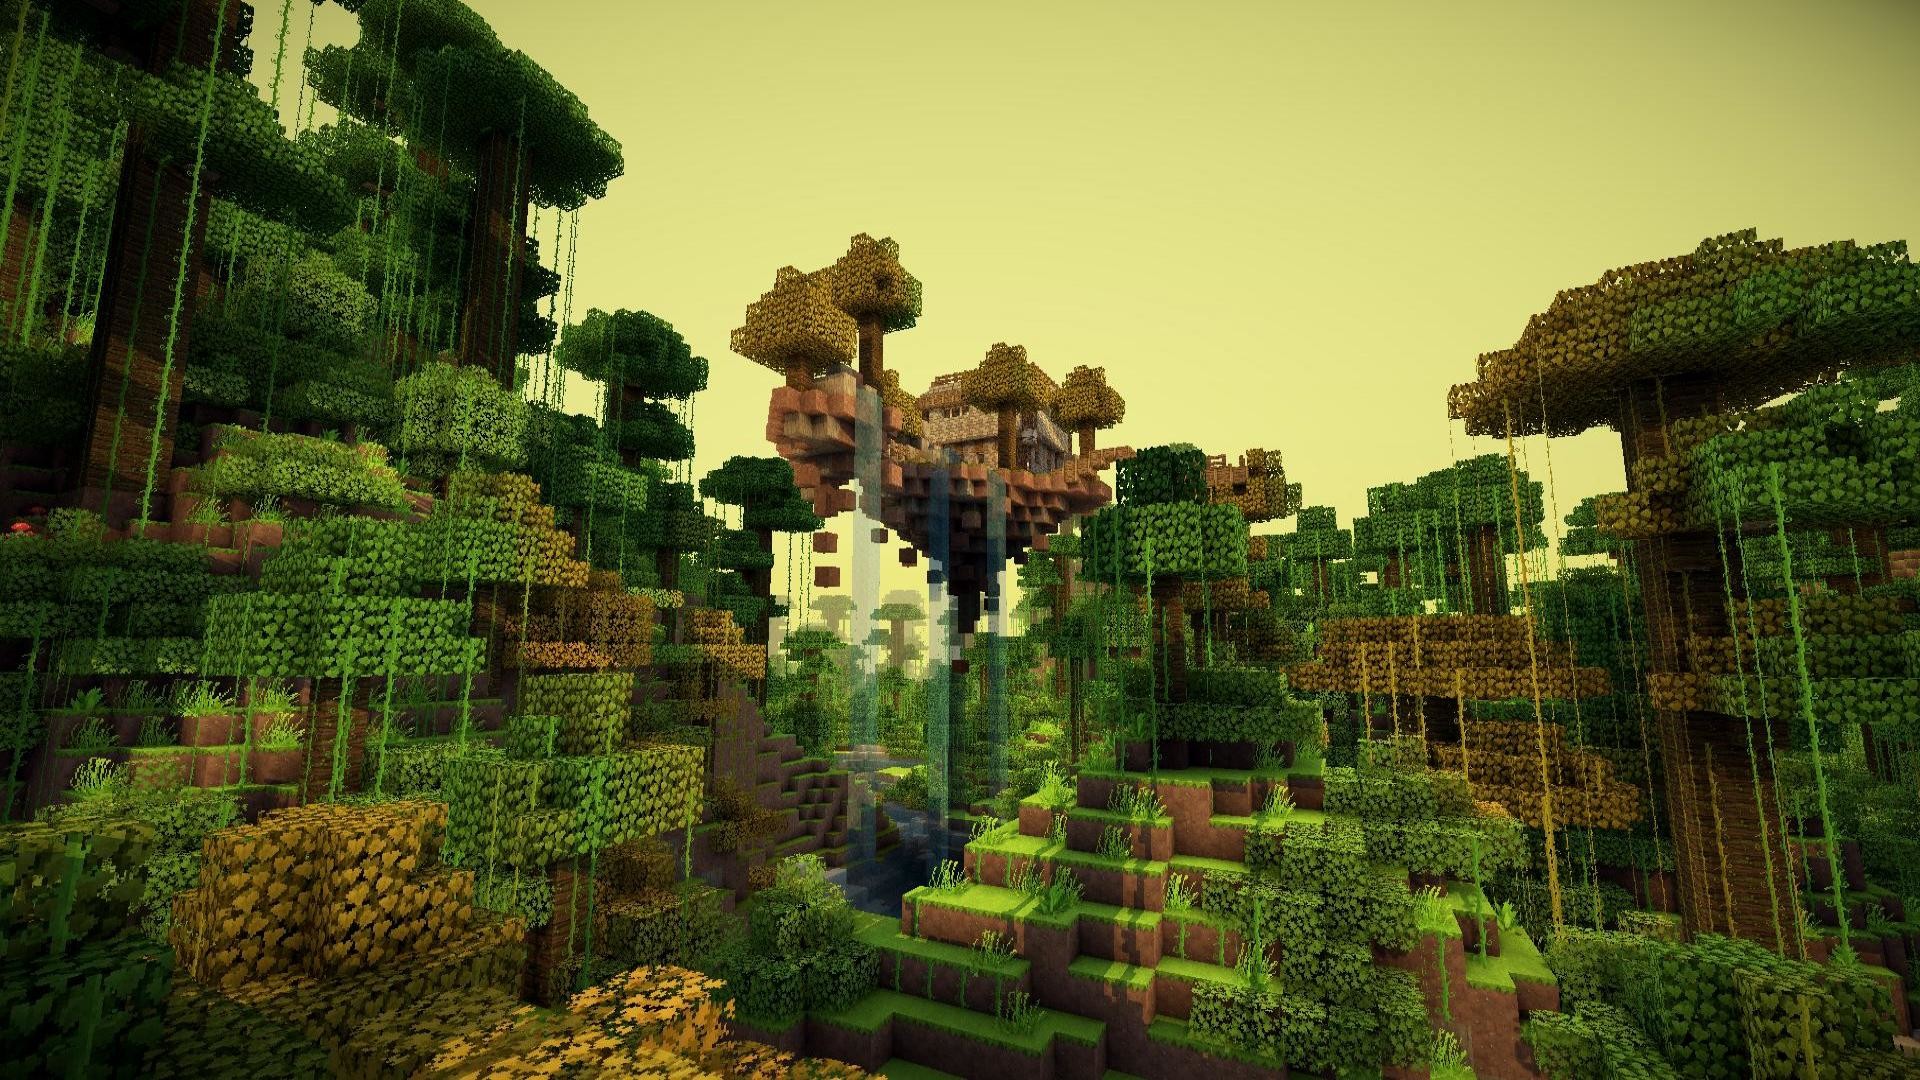 Wallpaper Wiki Minecraft Hd Pictures Download Pic Wpe006303 1920x1080